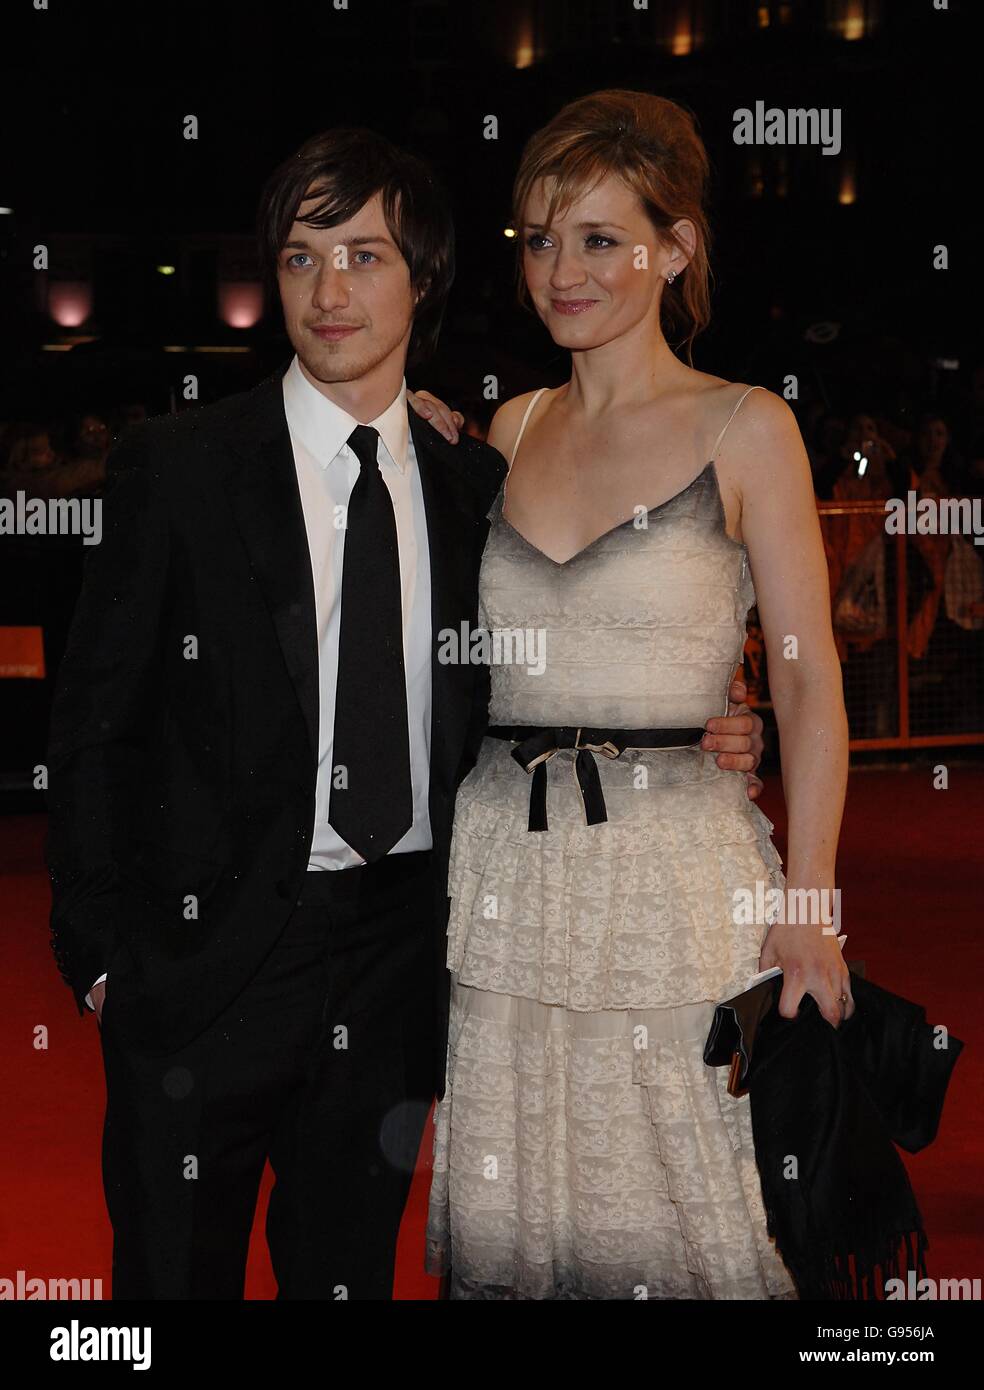 The Orange British Academy Film Awards (BAFTAS) 2006 - Odeon Leicester Square. Actress Anne-Marie Duff and actor James McAvoy arrive Stock Photo